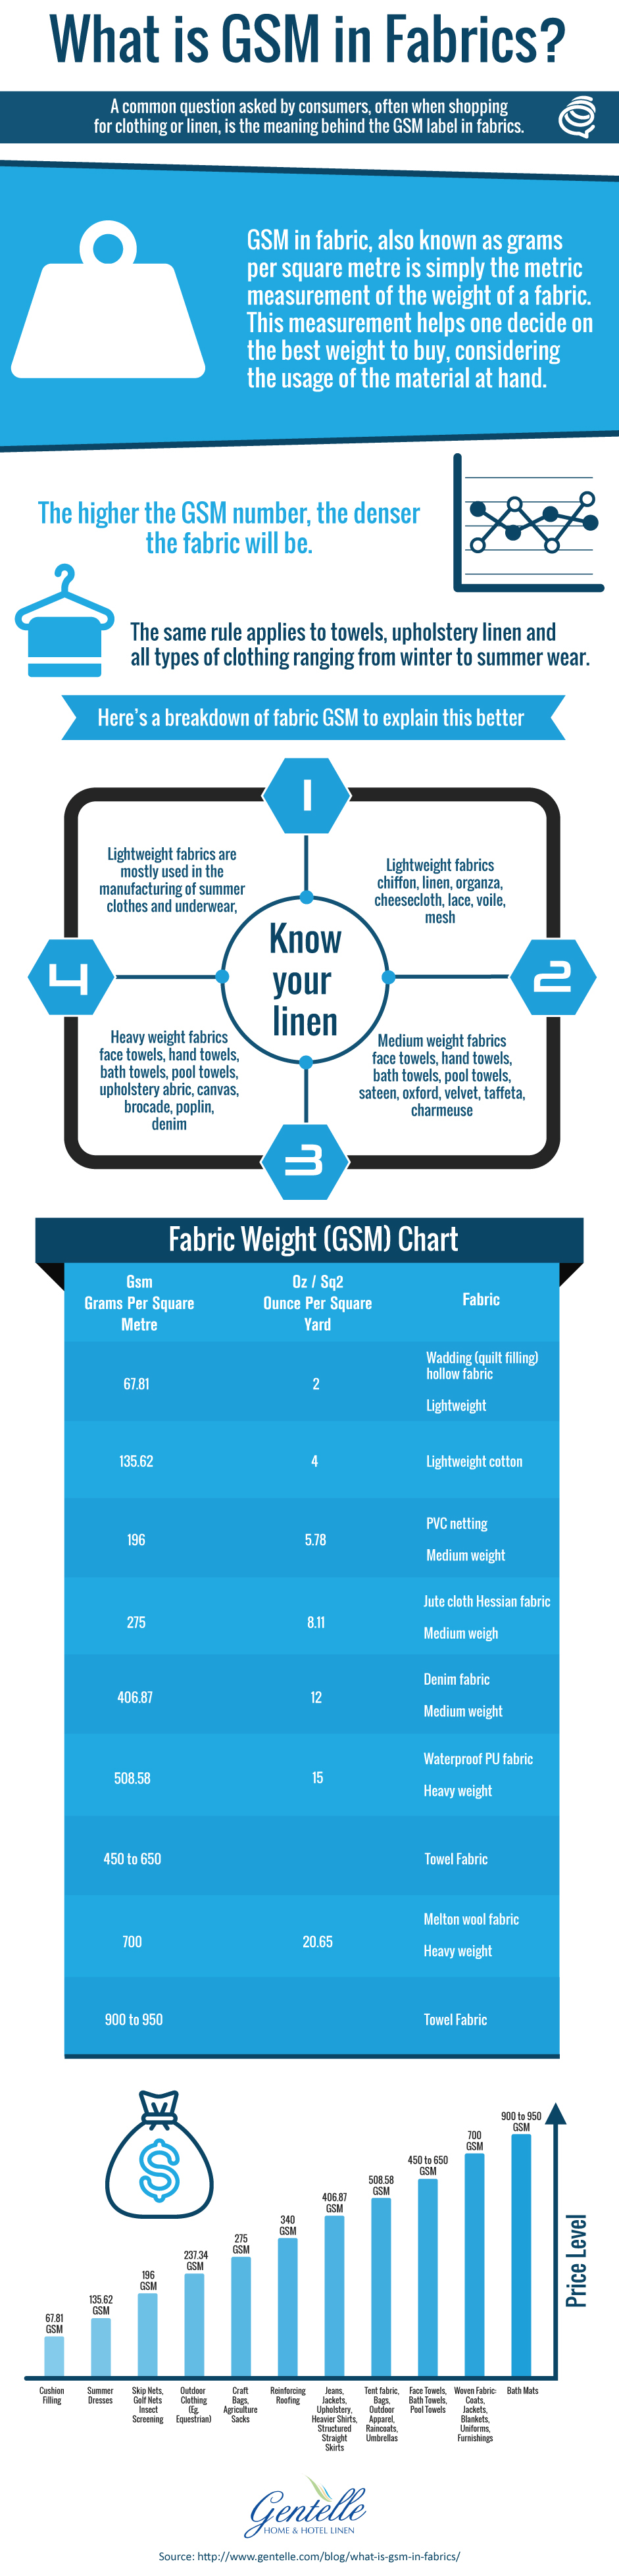 What-Is-GSM-In-Fabrics_Infographic